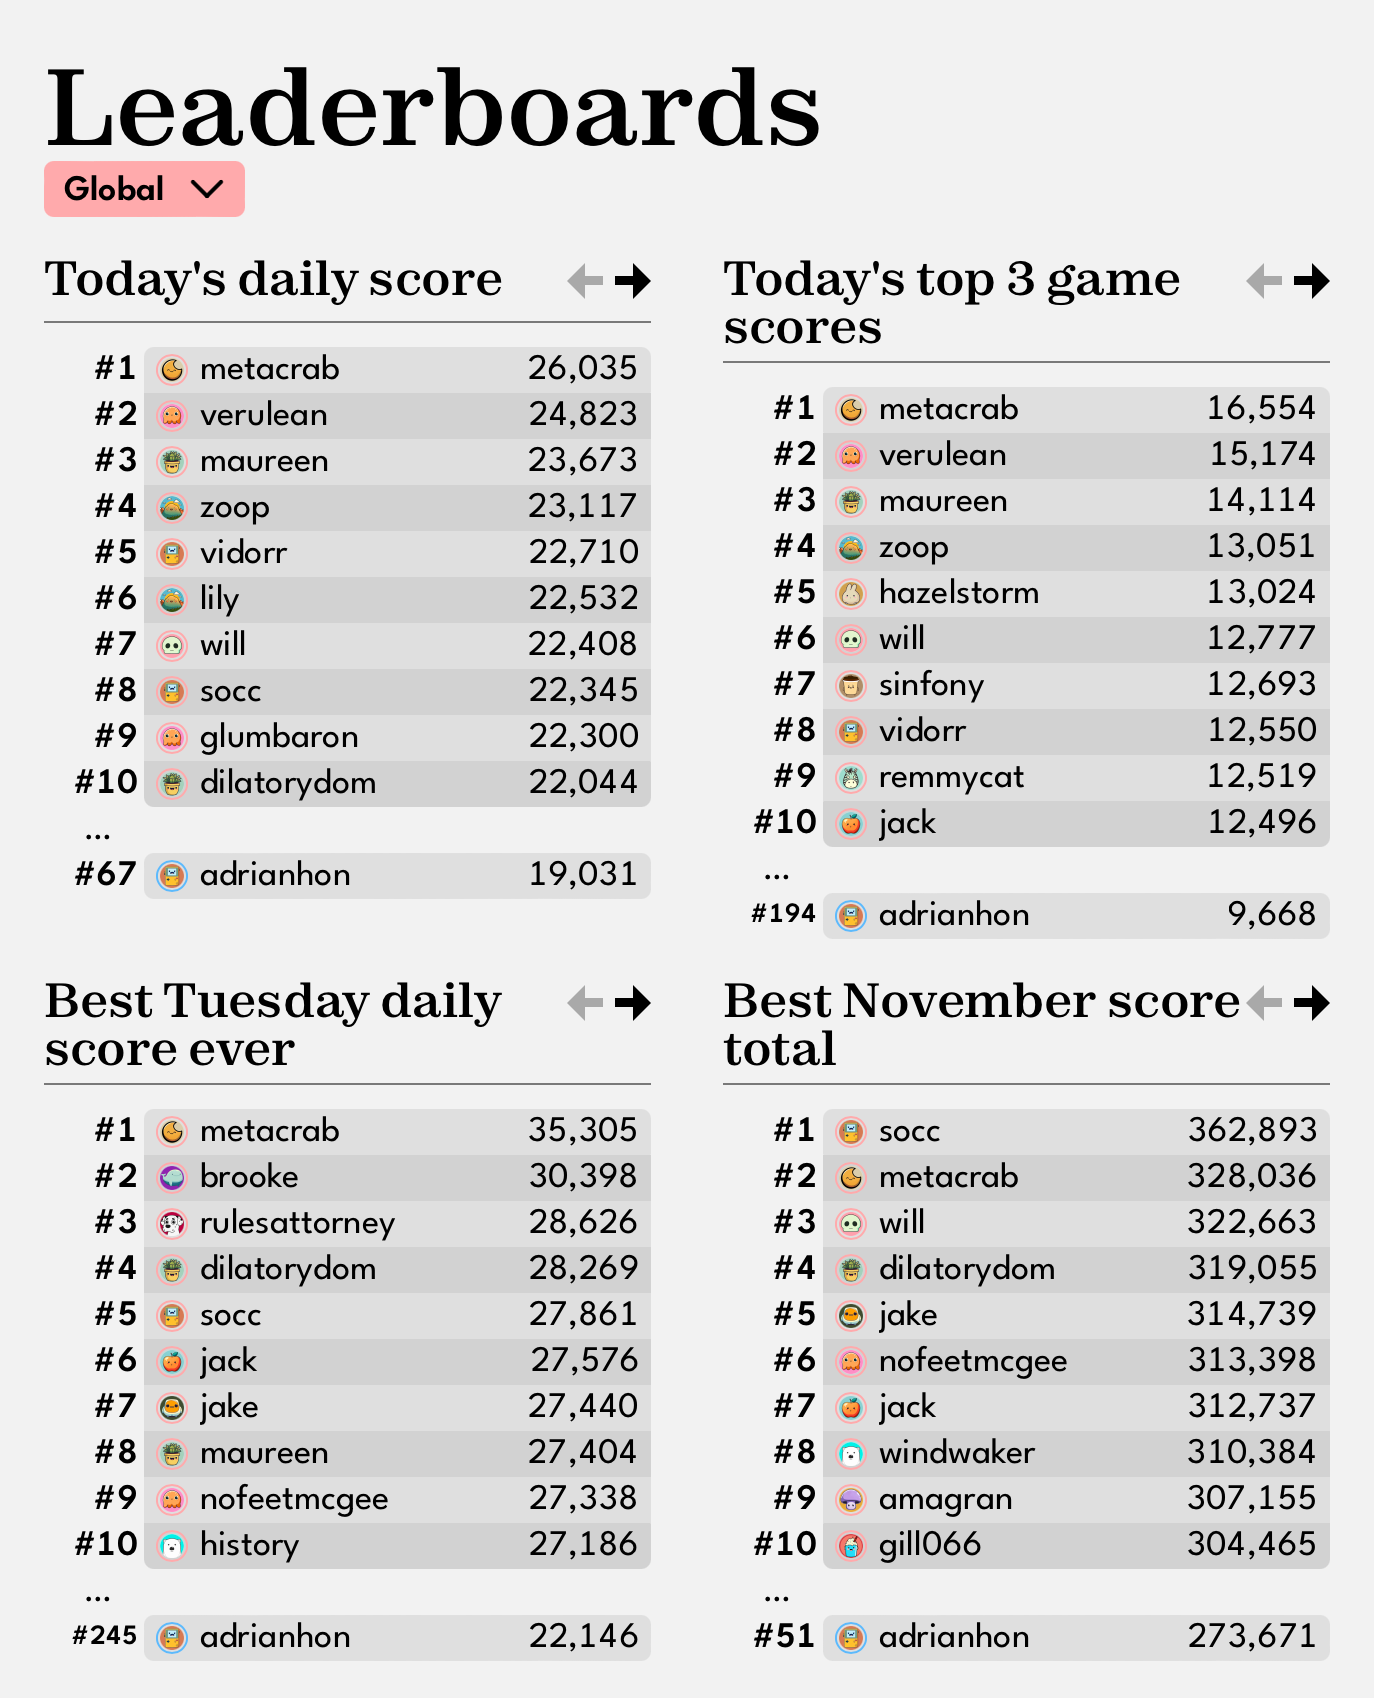 Global leaderboards showing today's daily scores, top 3 game scores, Best Tuesday daily score, Best November score total